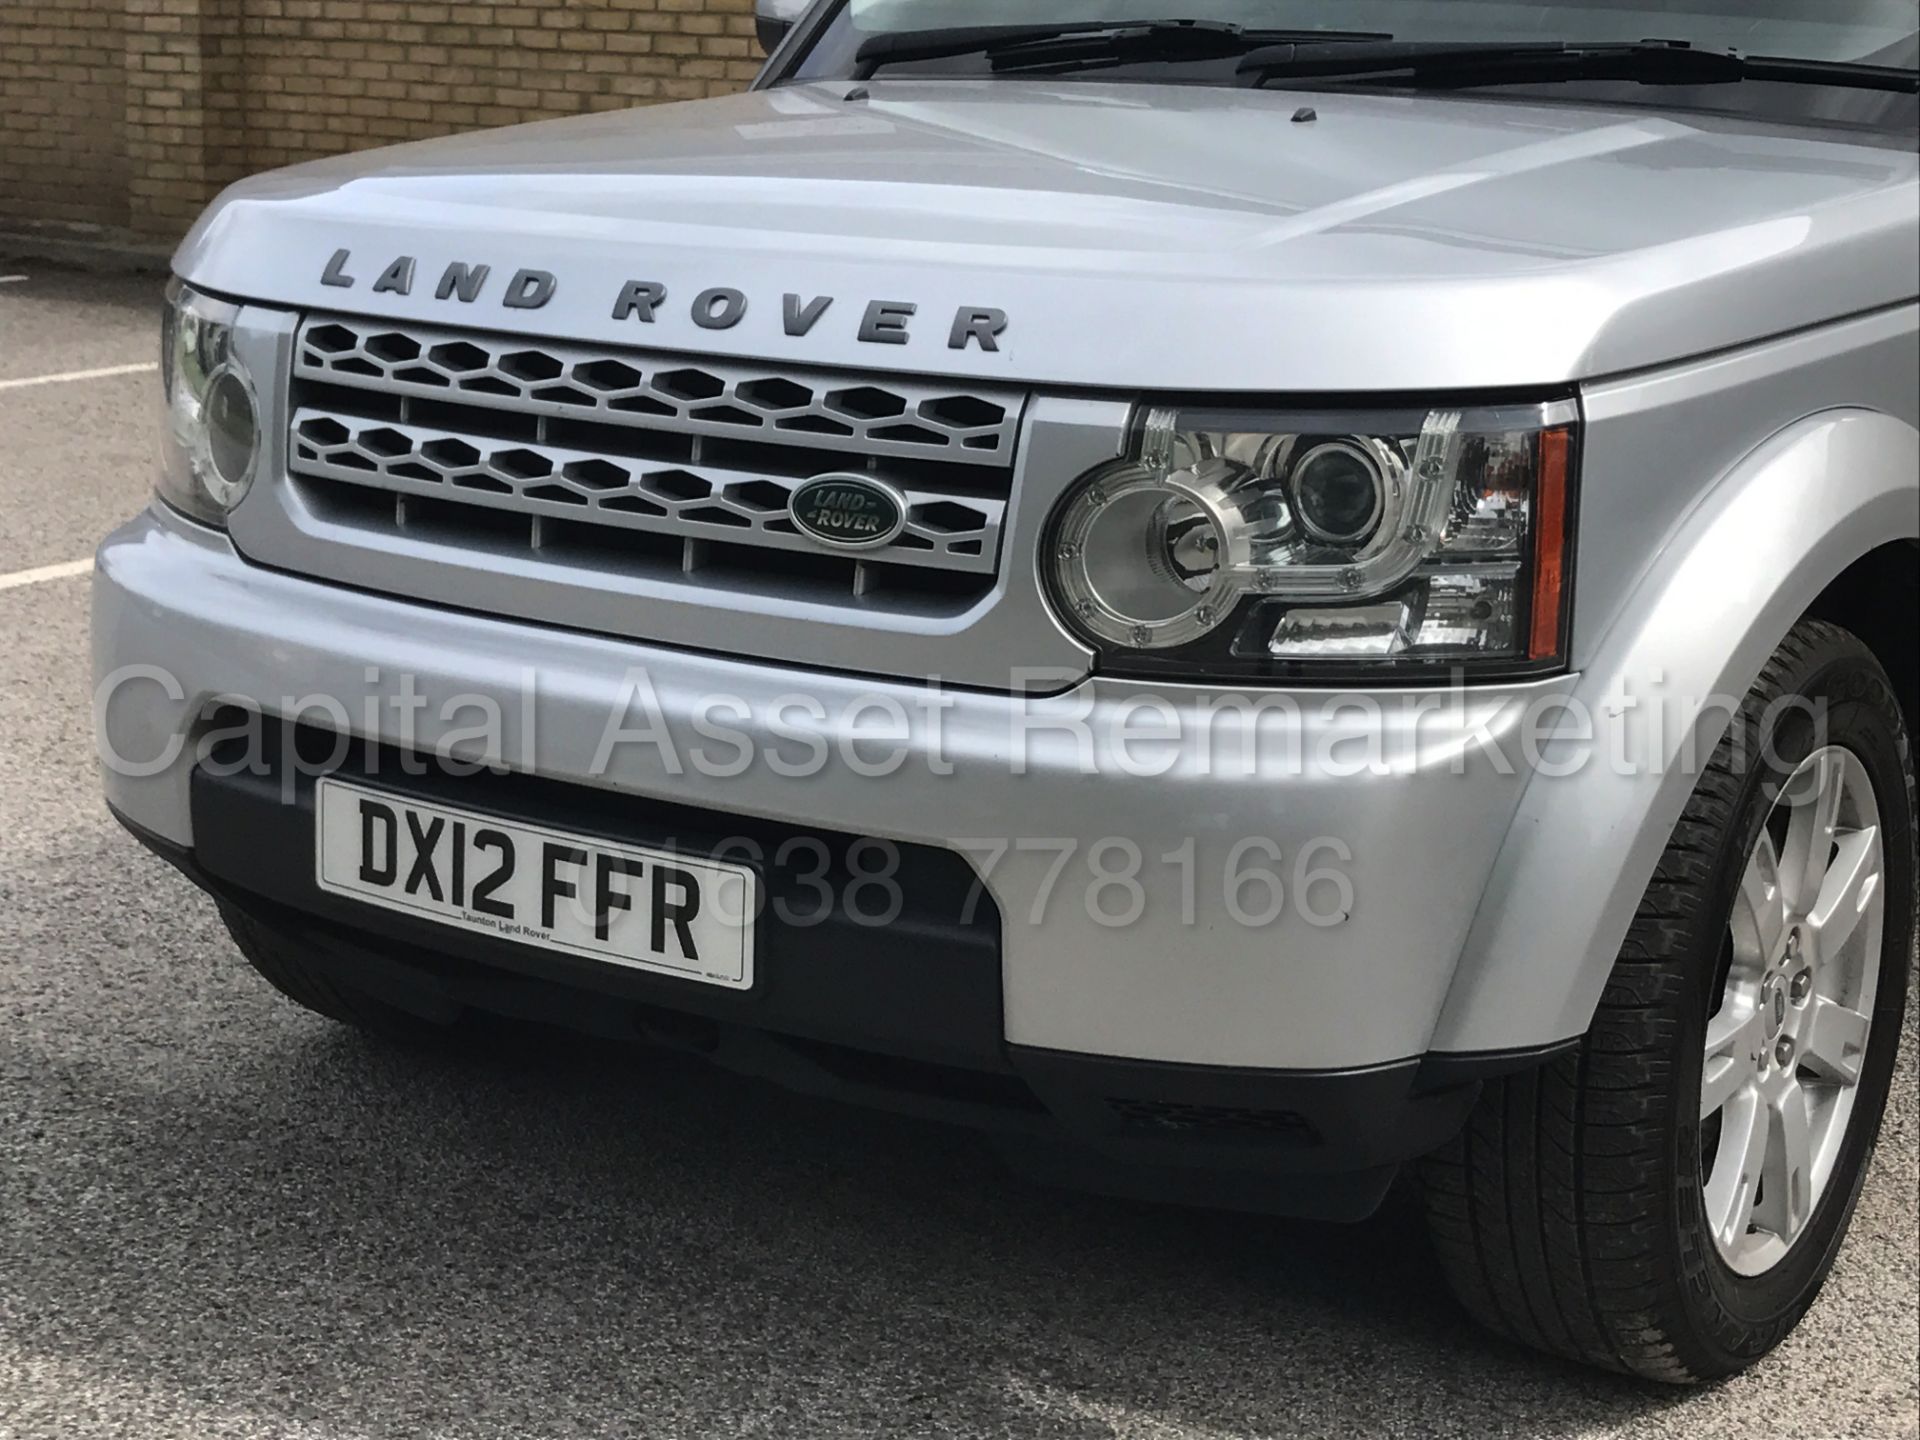 (On Sale) LAND ROVER DISCOVERY 4 (2012) '3.0 SDV6 - 8 SPEED AUTO - 7 SEATER' **HUGE SPEC** (1 OWNER) - Image 12 of 33